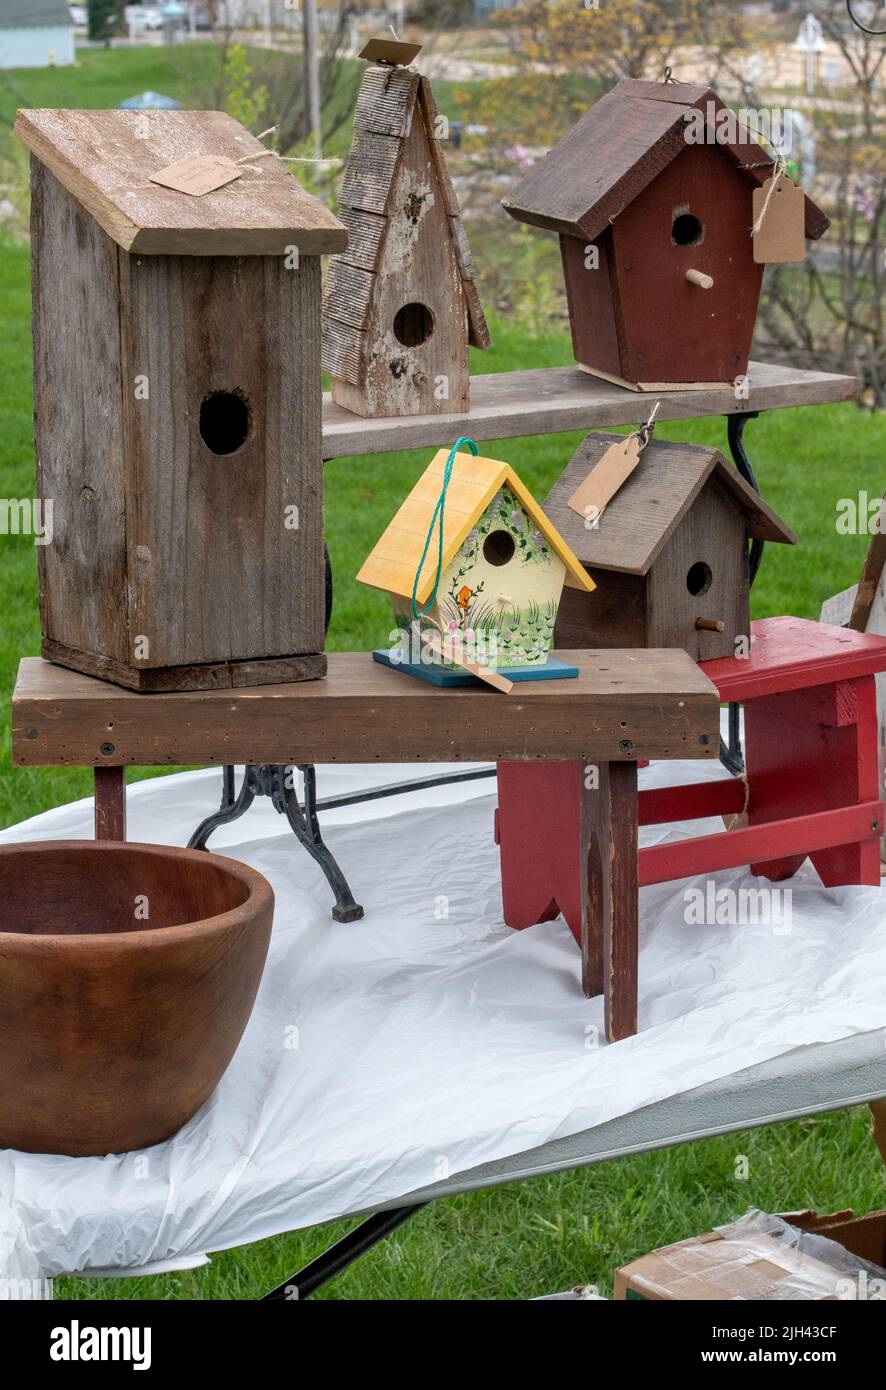 Collection of rustic wooden bird houses, for sale at an outdoor arts and crafts show Stock Photo